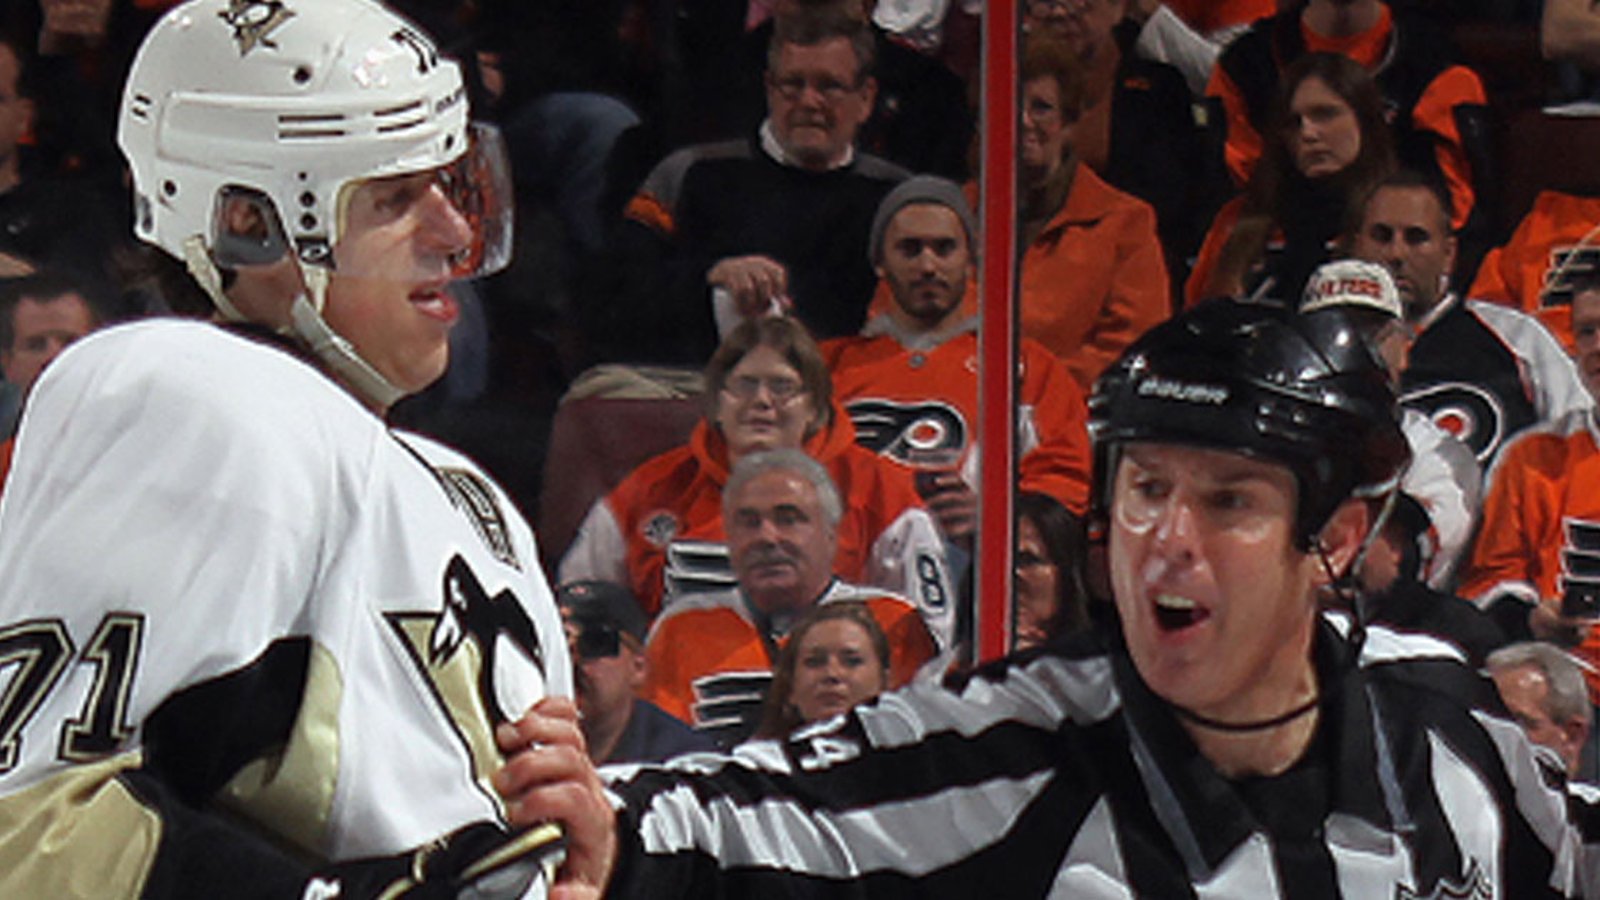 Malkin wants to know why the officials are rooting for the Sharks 